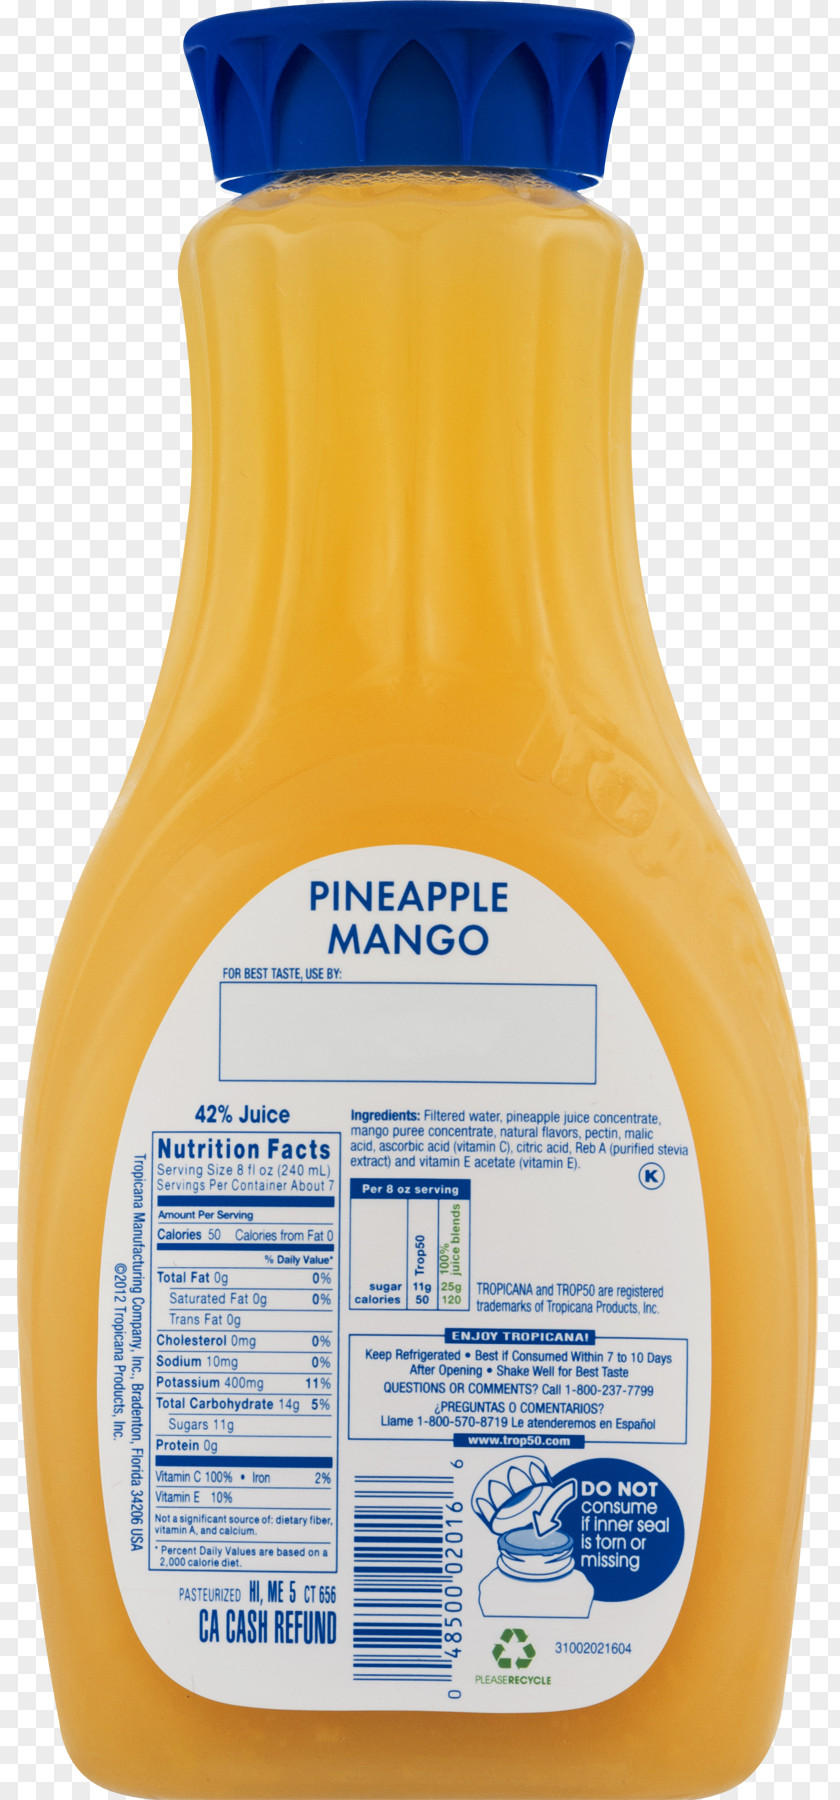 Mango Juice Orange Drink Tropicana Products Nutrition Facts Label PNG